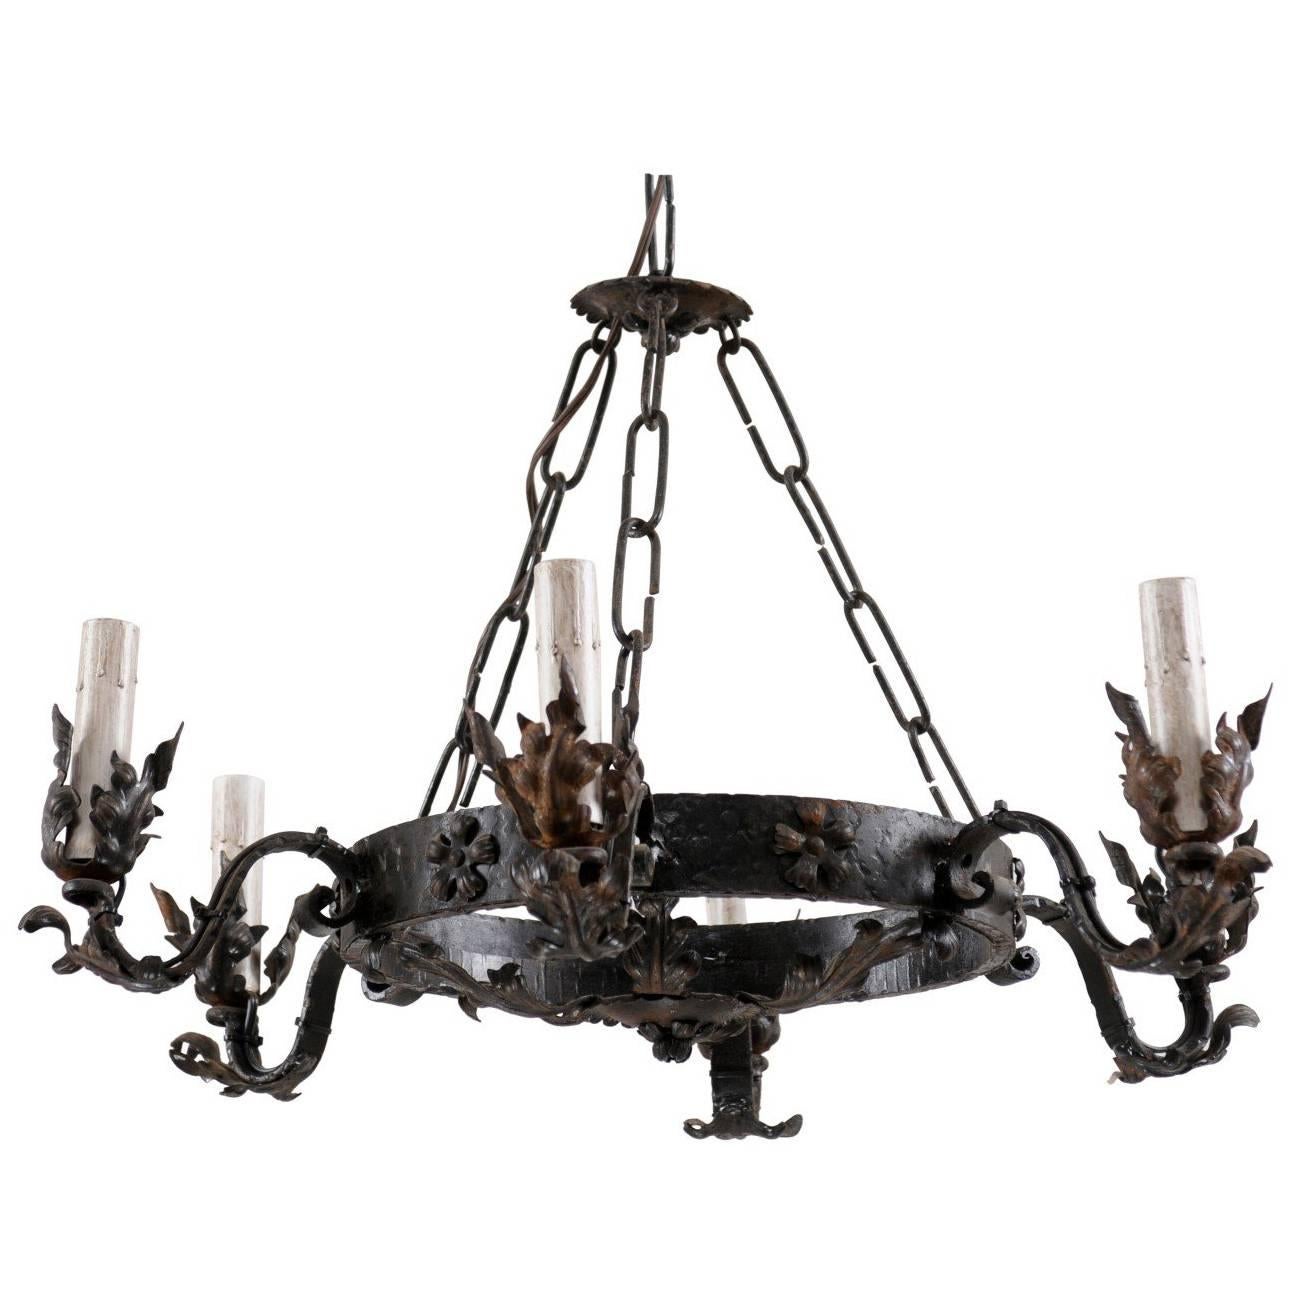 Mid-20th Century Ring Shaped Dark Iron Chandelier with Floral and Leaf Motifs For Sale